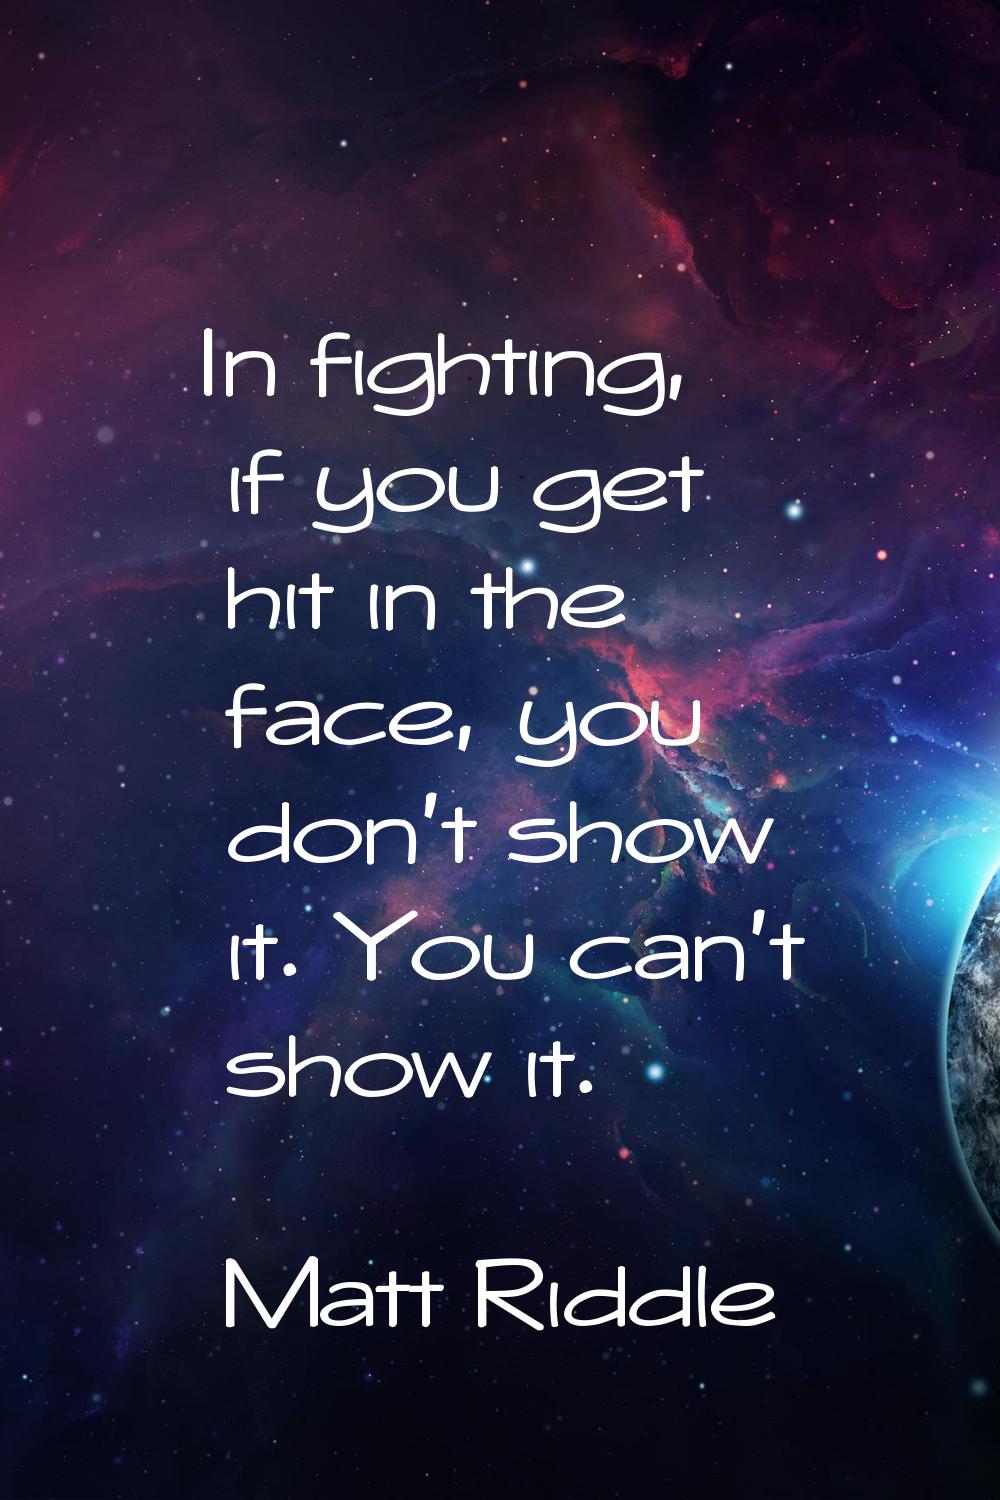 In fighting, if you get hit in the face, you don't show it. You can't show it.